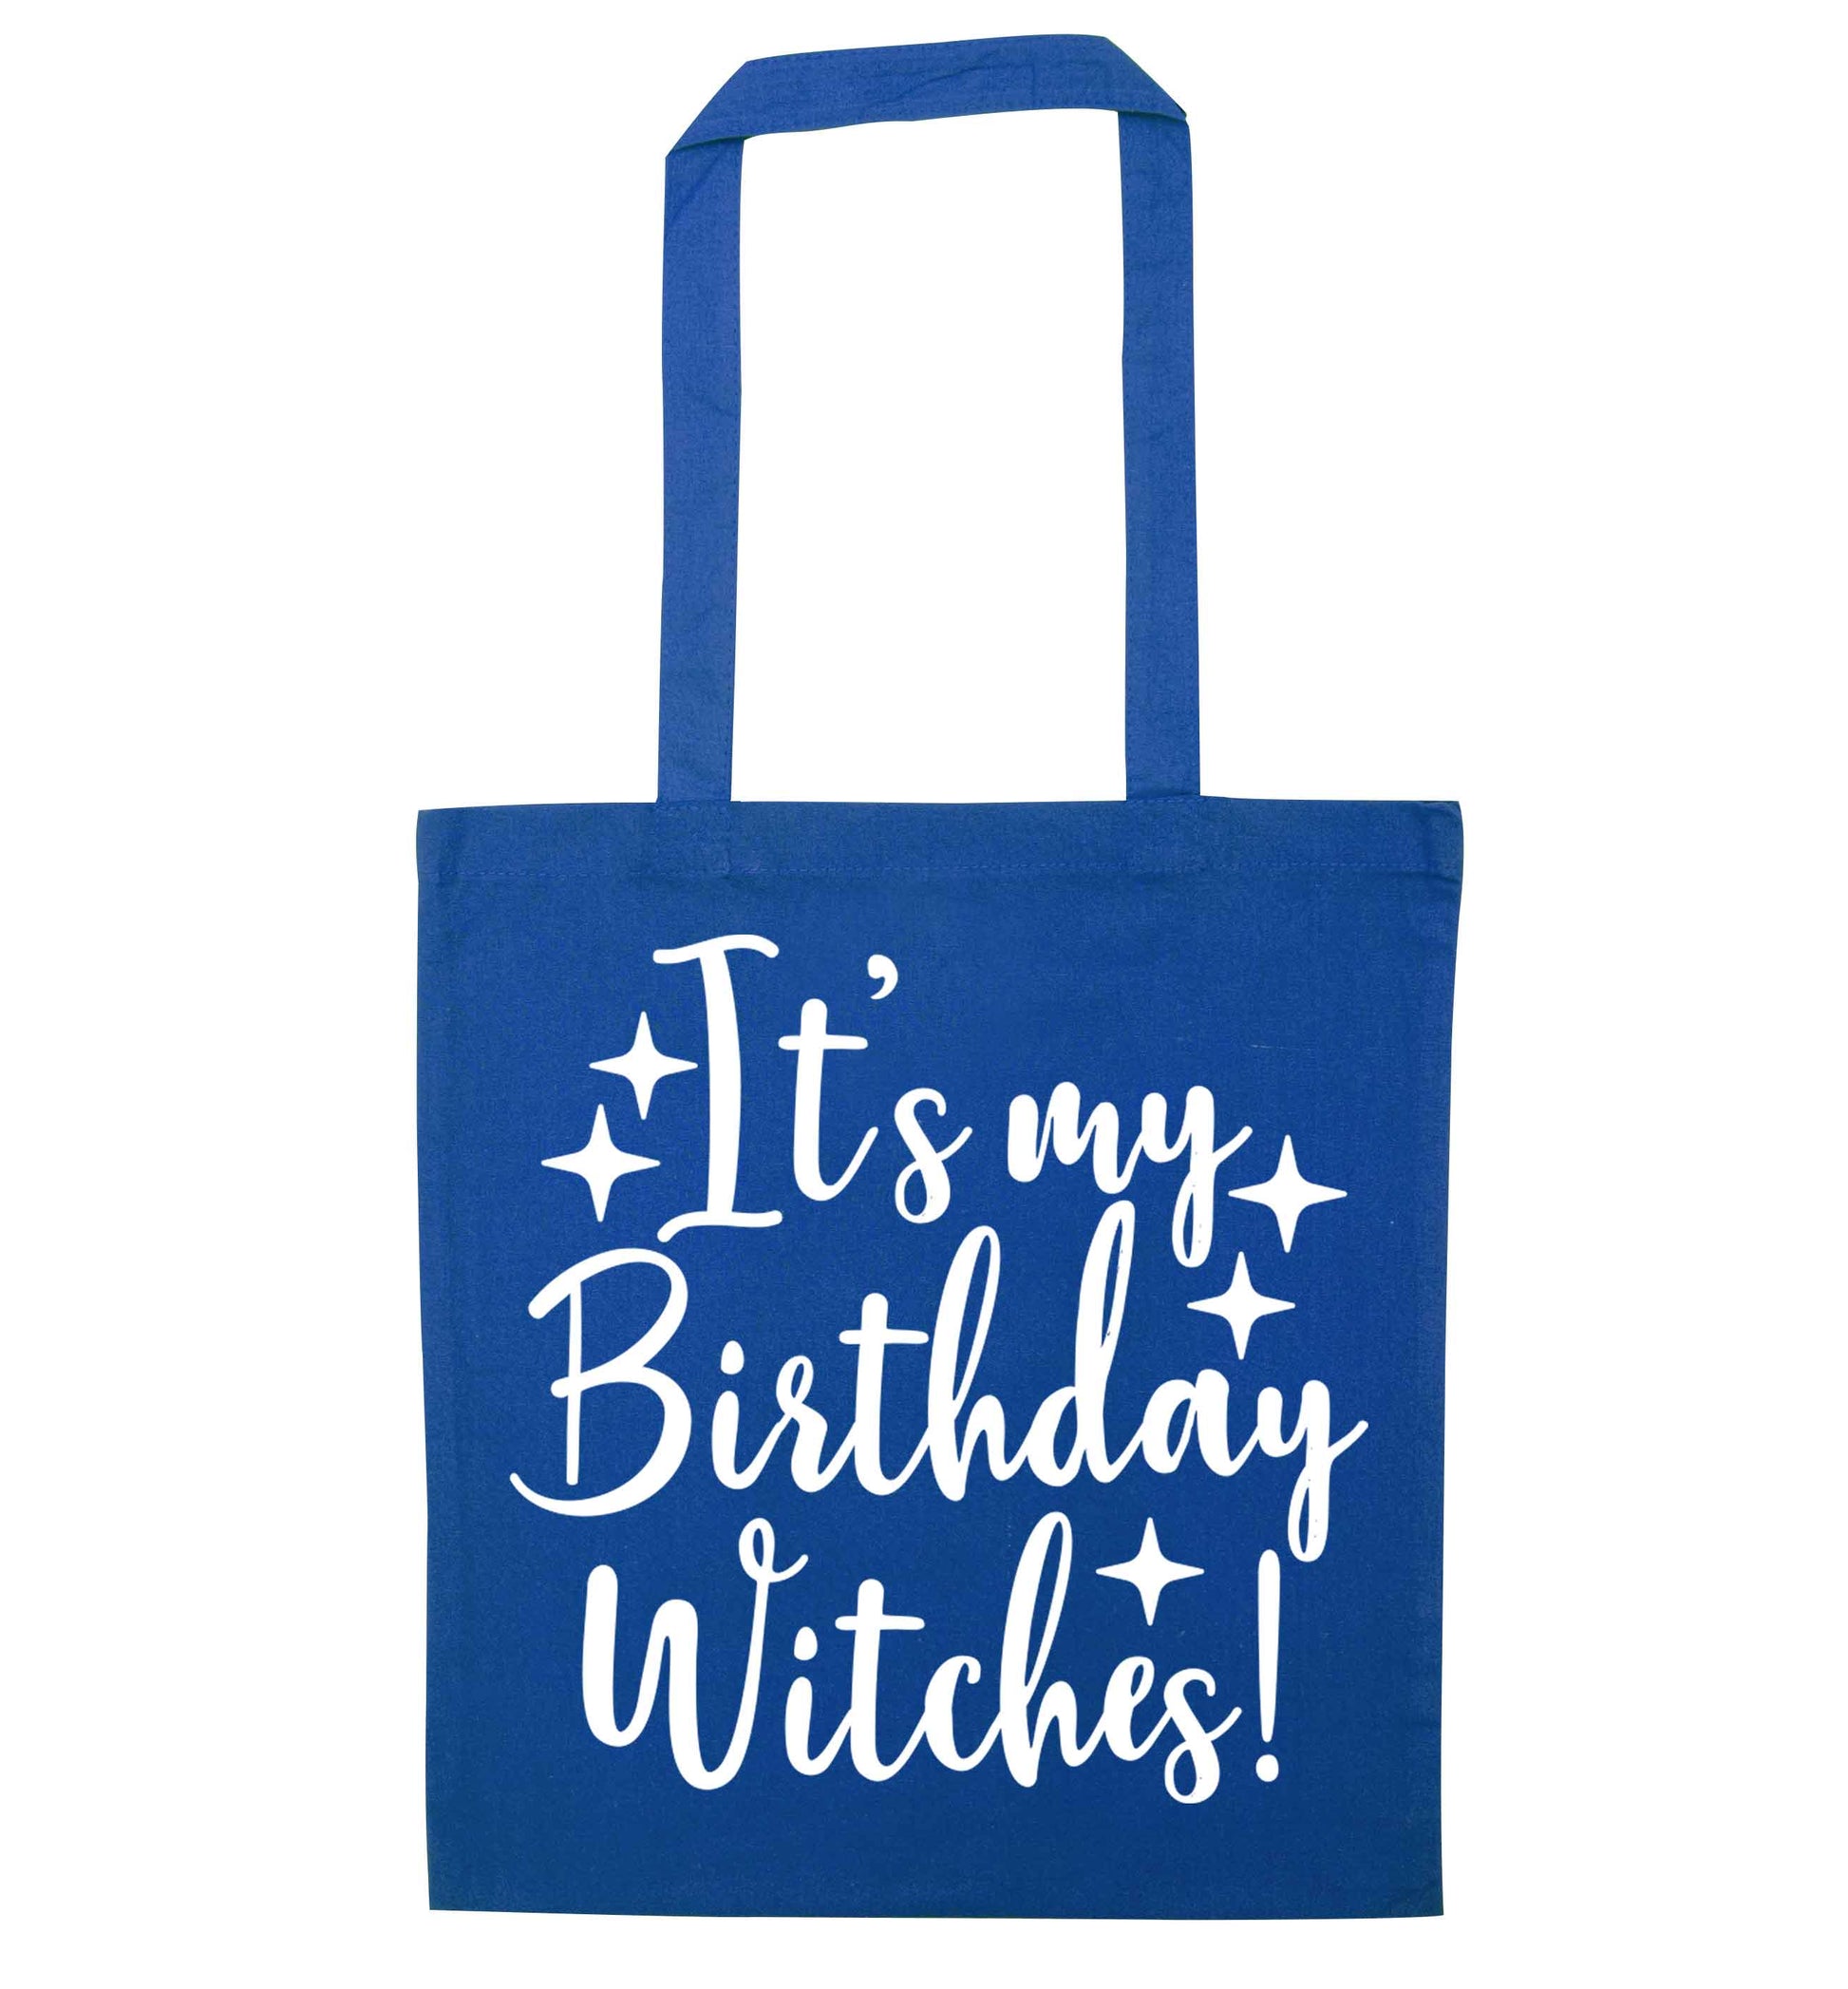 It's my birthday witches!blue tote bag